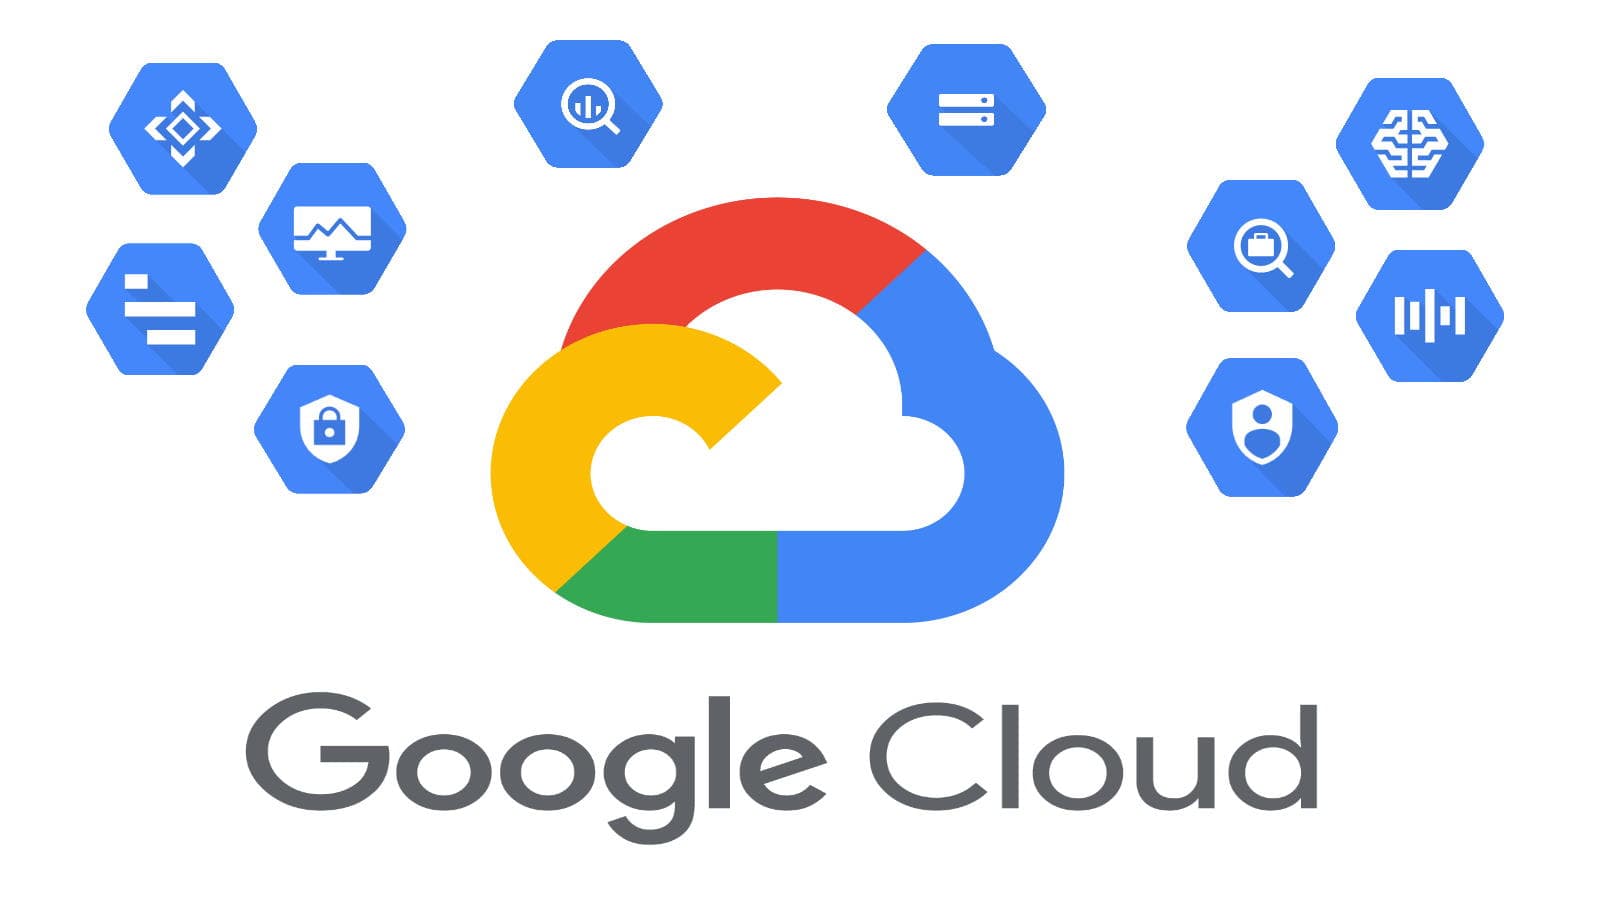 Google eliminates data transfer fees for cloud switchers